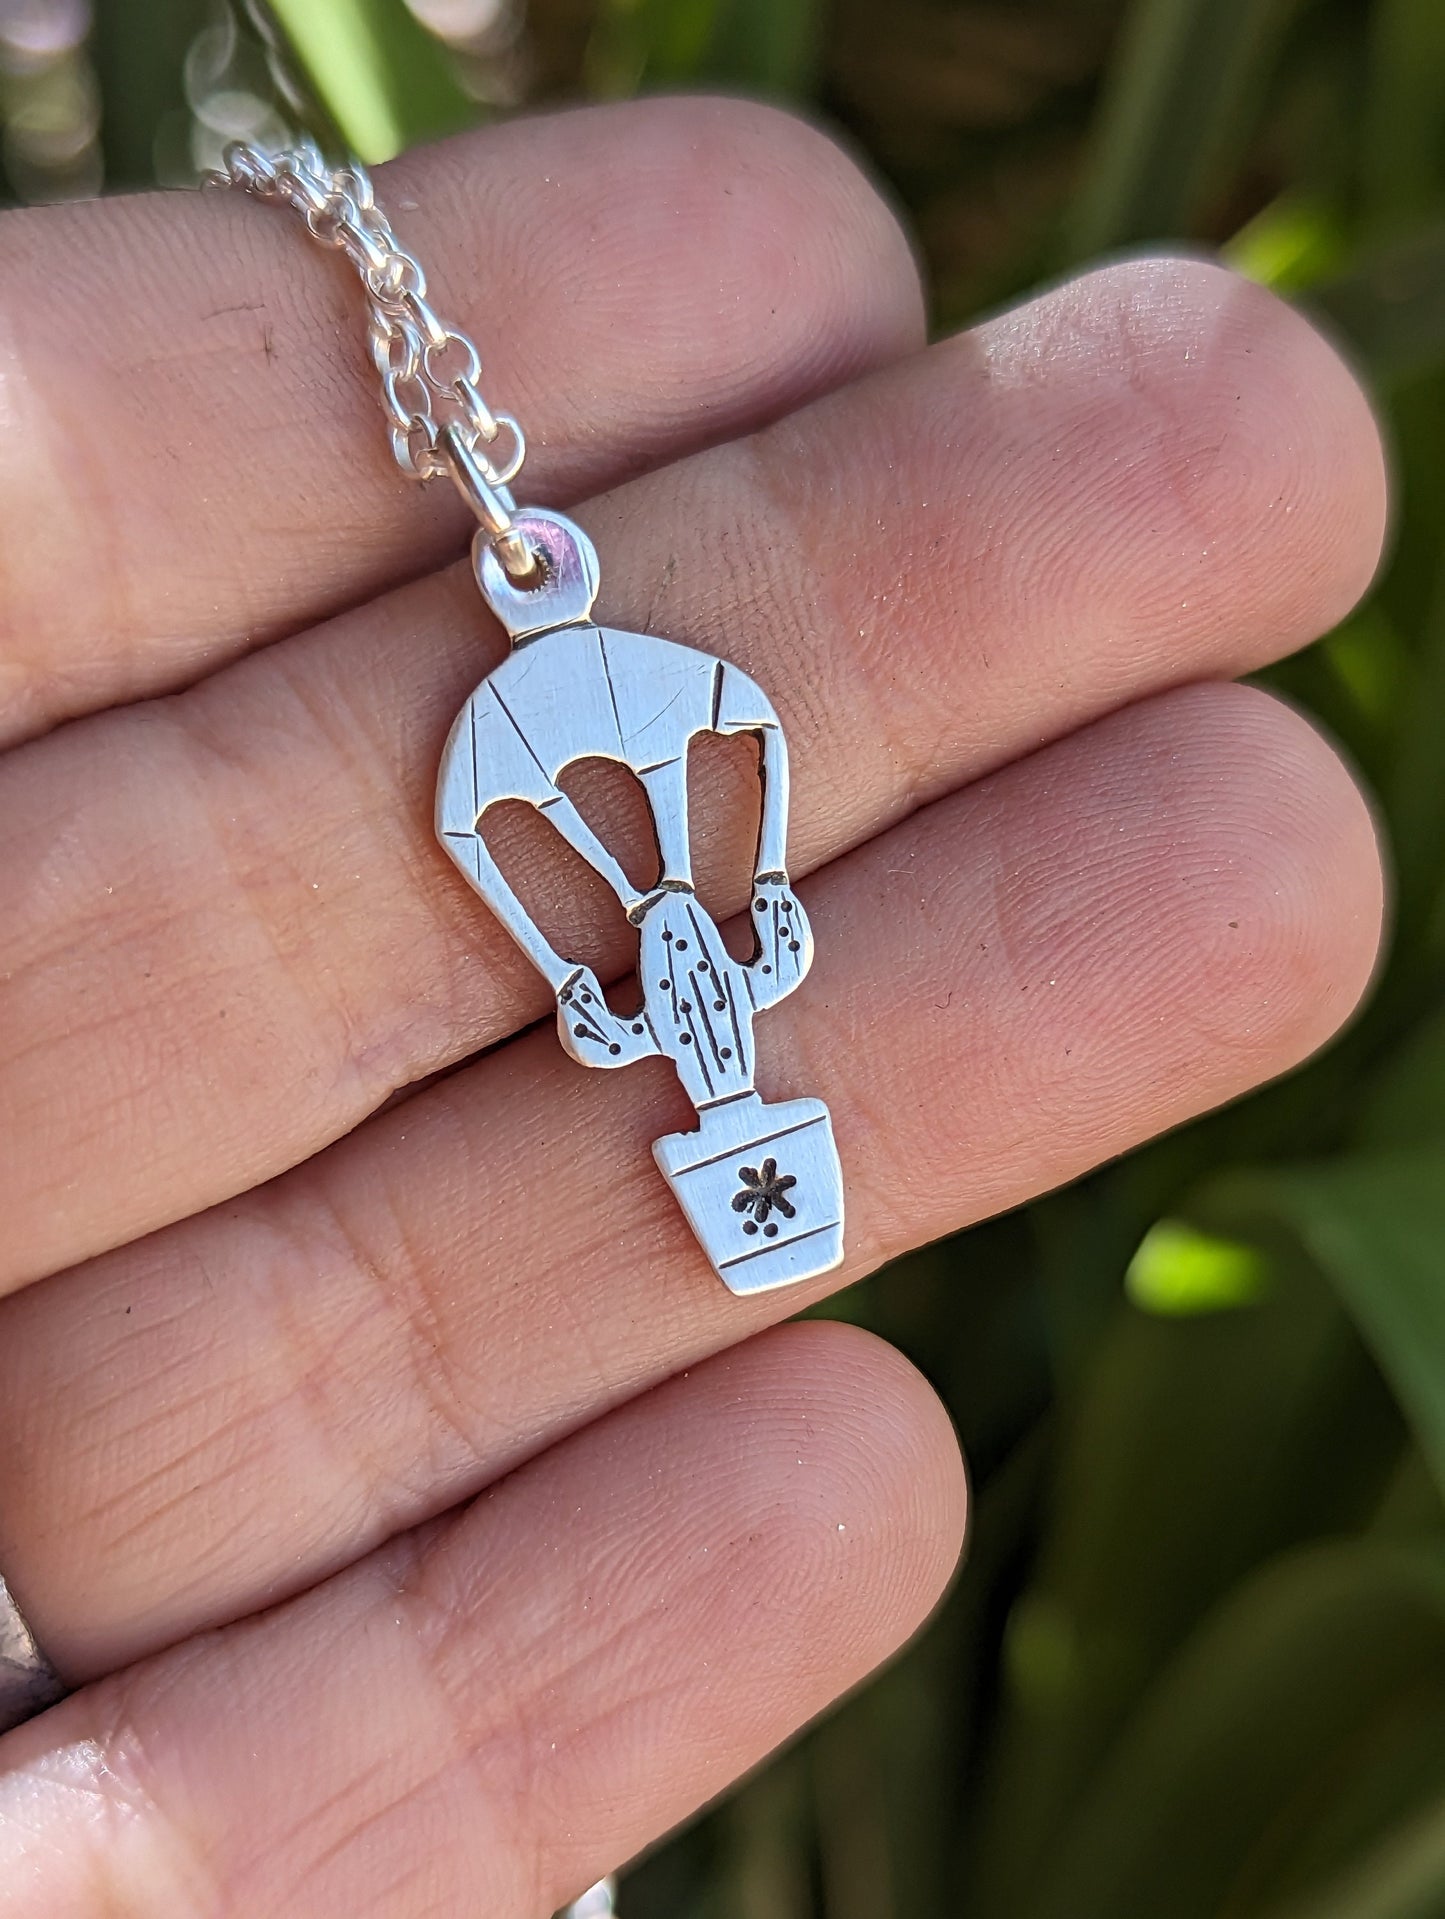 dainty sterling silver saguaro cactus charm on a parachute